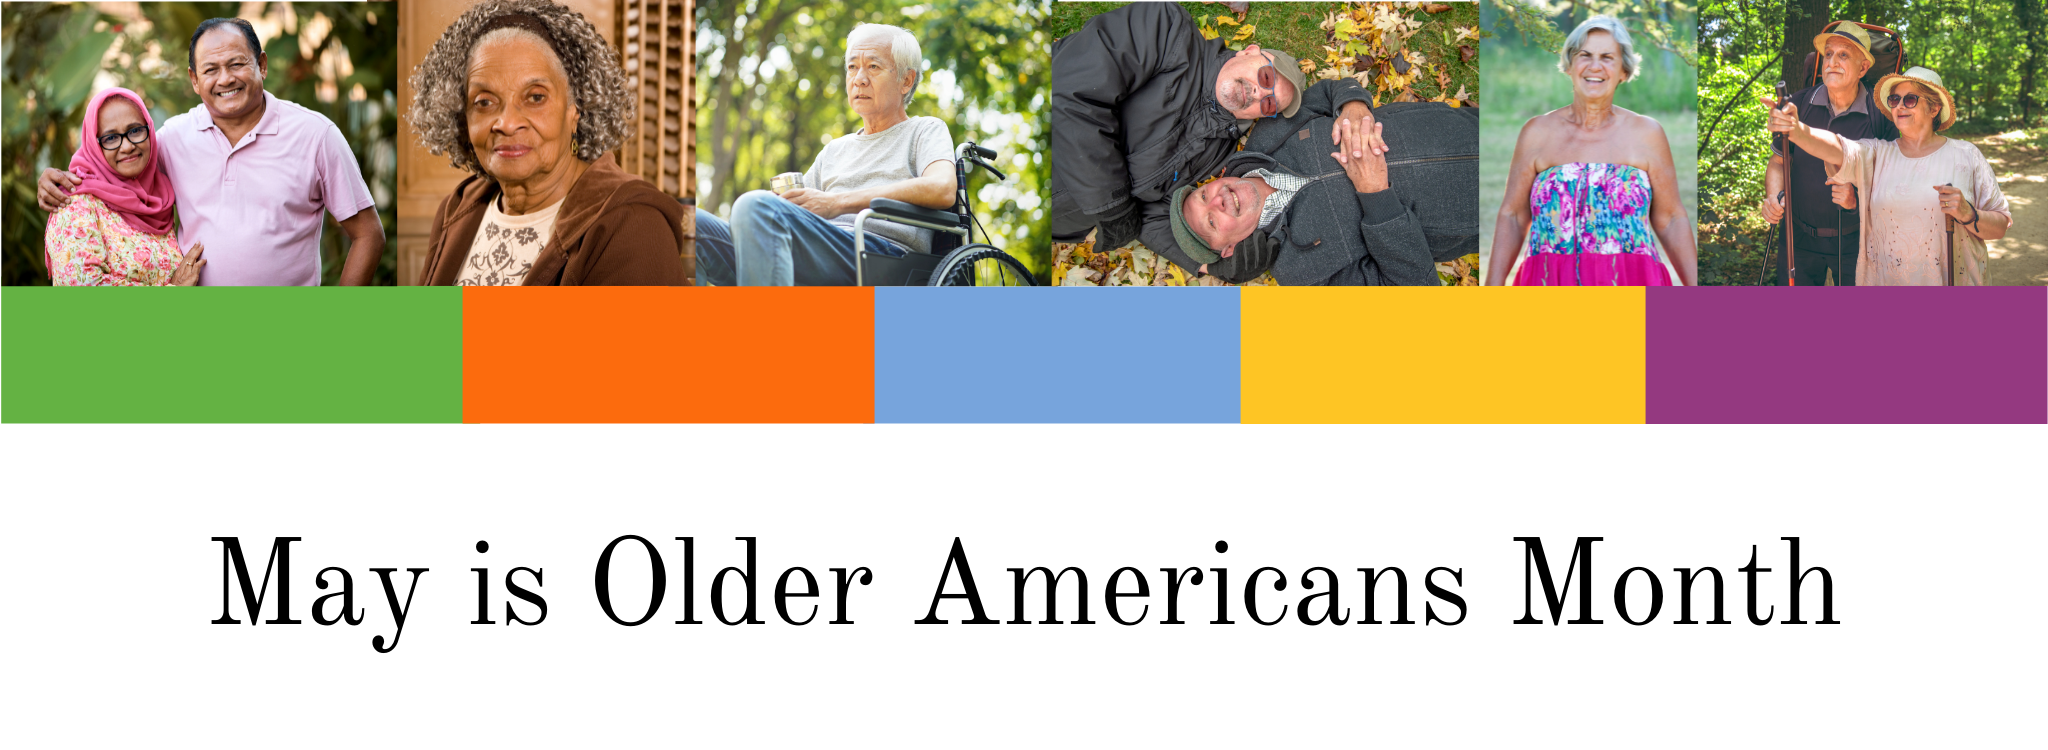 banner recognizing the month of May as the Older Americans Month